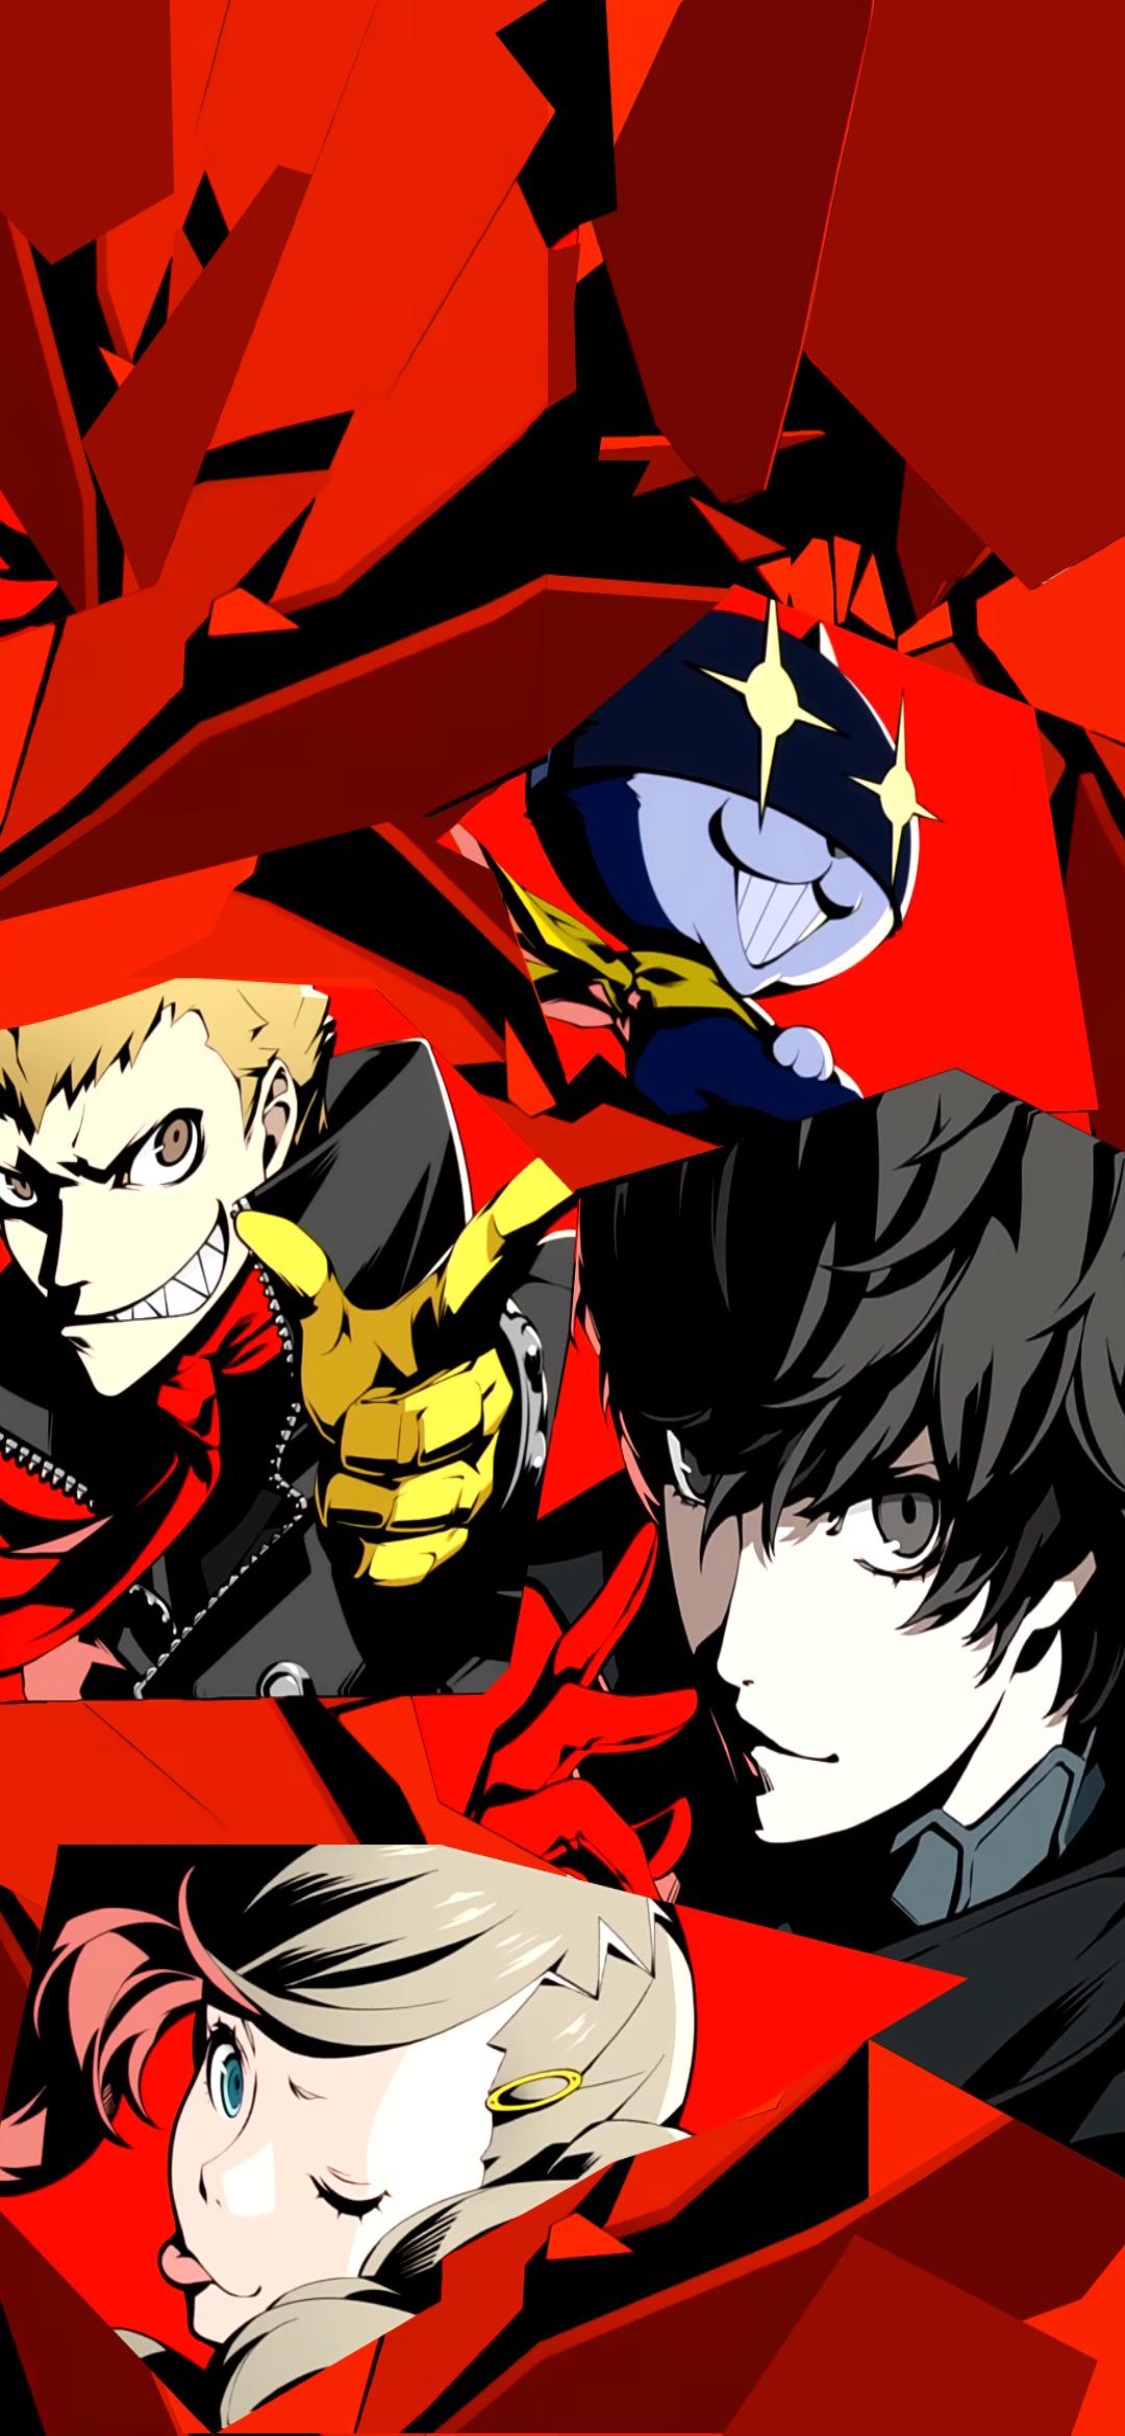 Persona 5 Wallpaper For Iphone - Persona 5 Wallpaper Iphone X , HD Wallpaper & Backgrounds